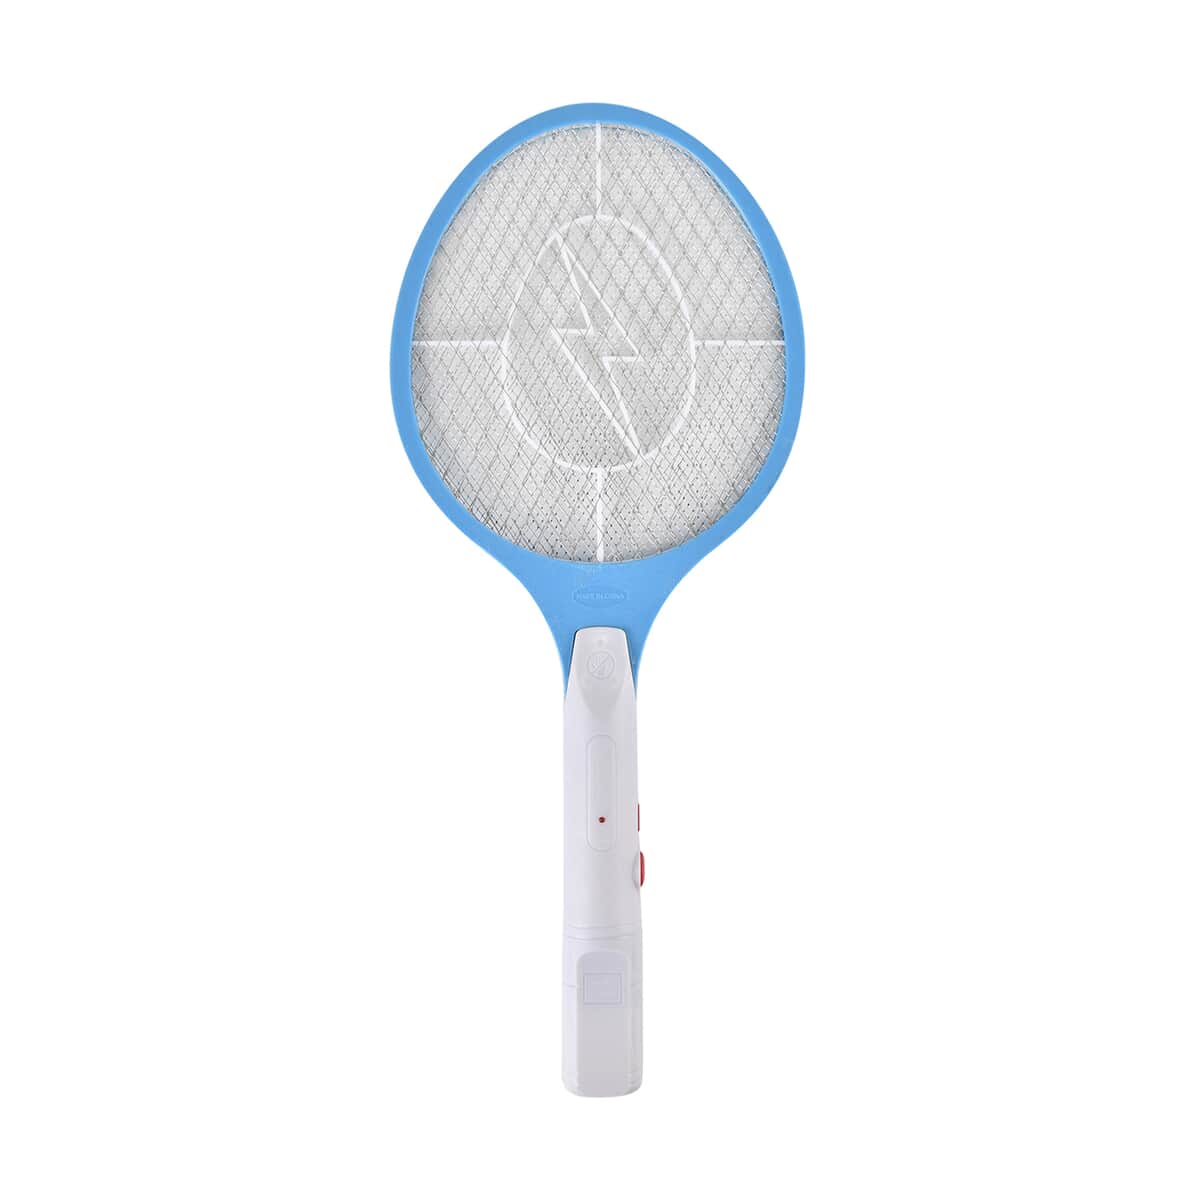 Rechargeable Handheld Zapper Mosquito Swatter - Blue (Powered by USB Cable) (19.6") image number 0